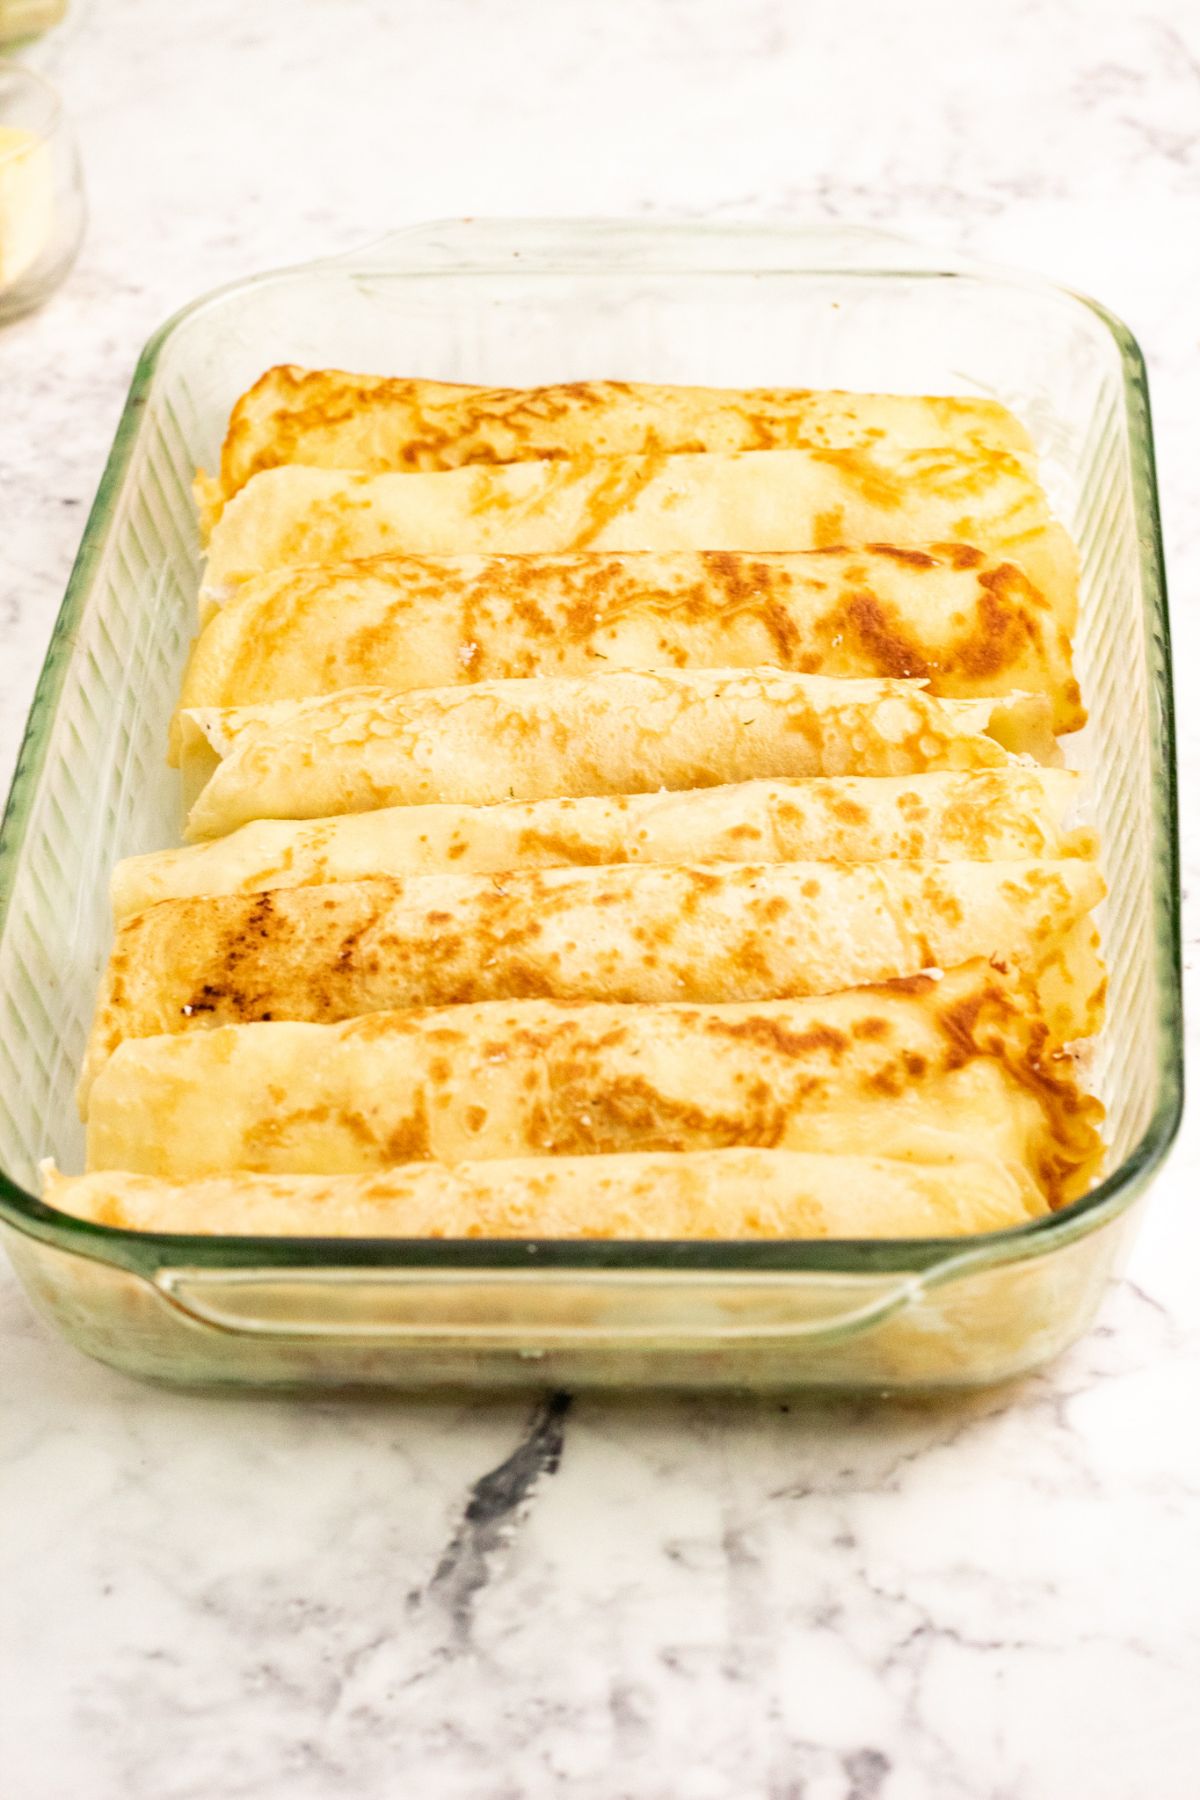 Assembled crepes on a baking dish.